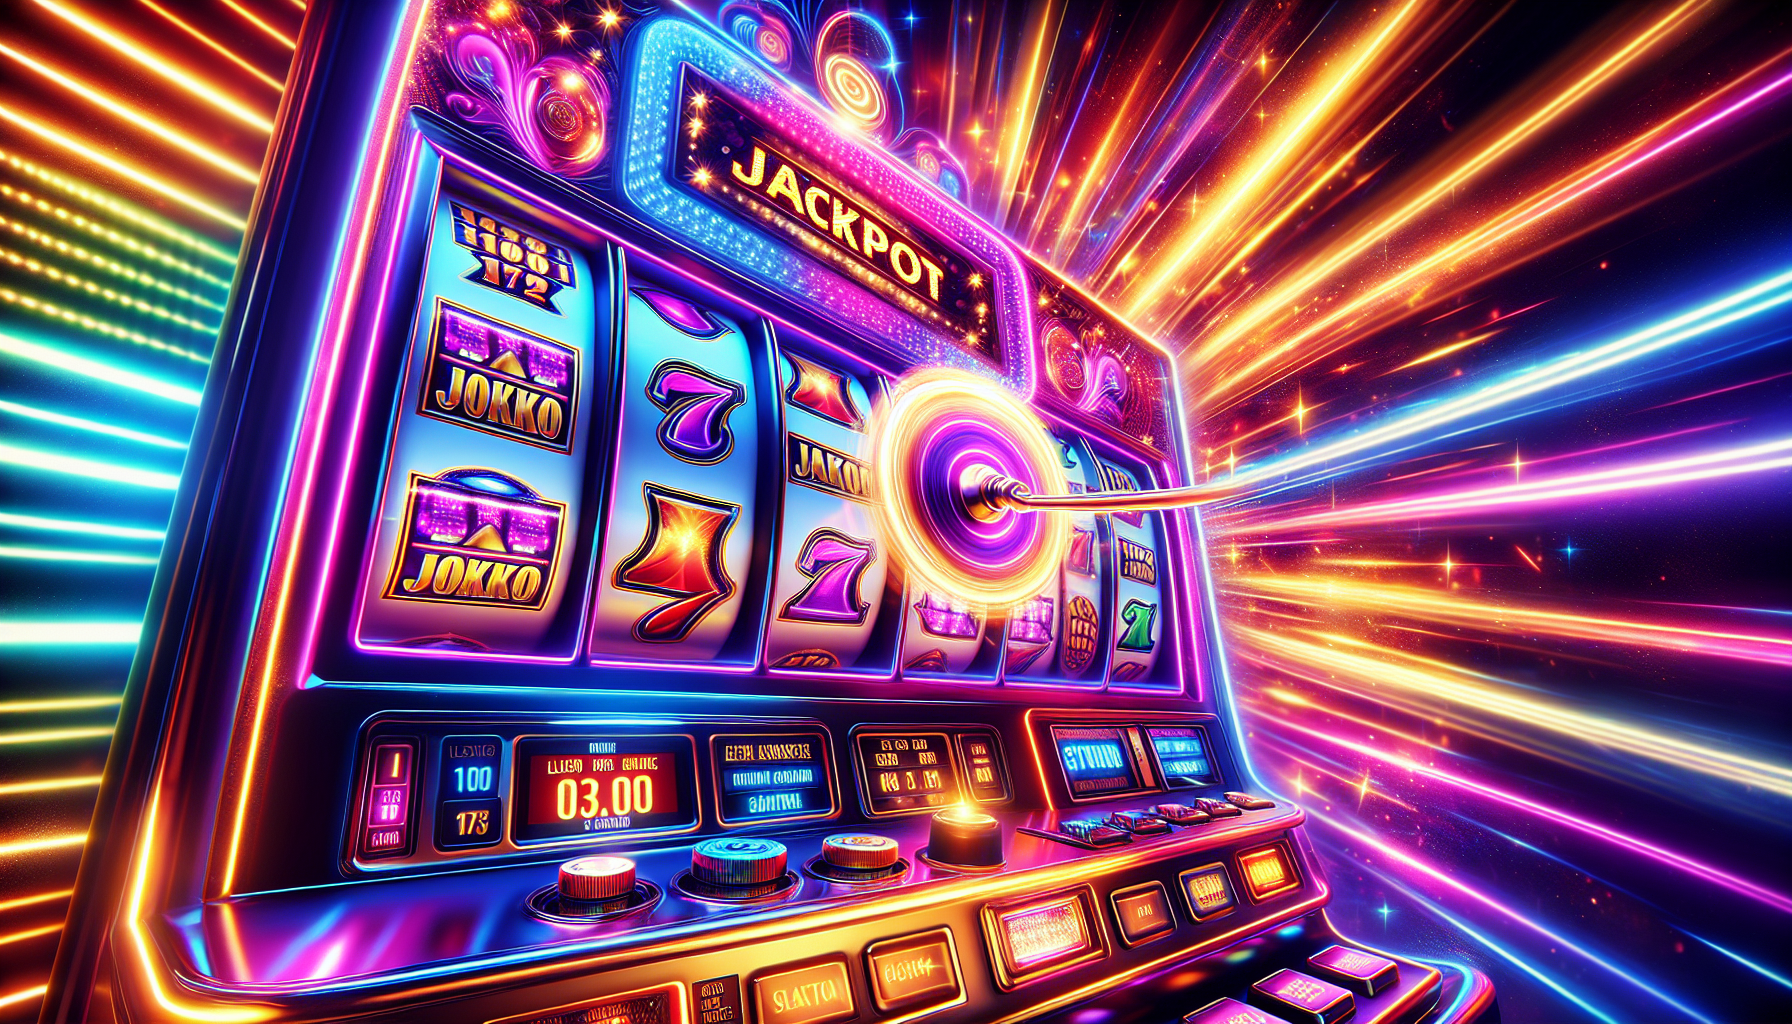 Can You Play Slots Online For Real Money In The USA?